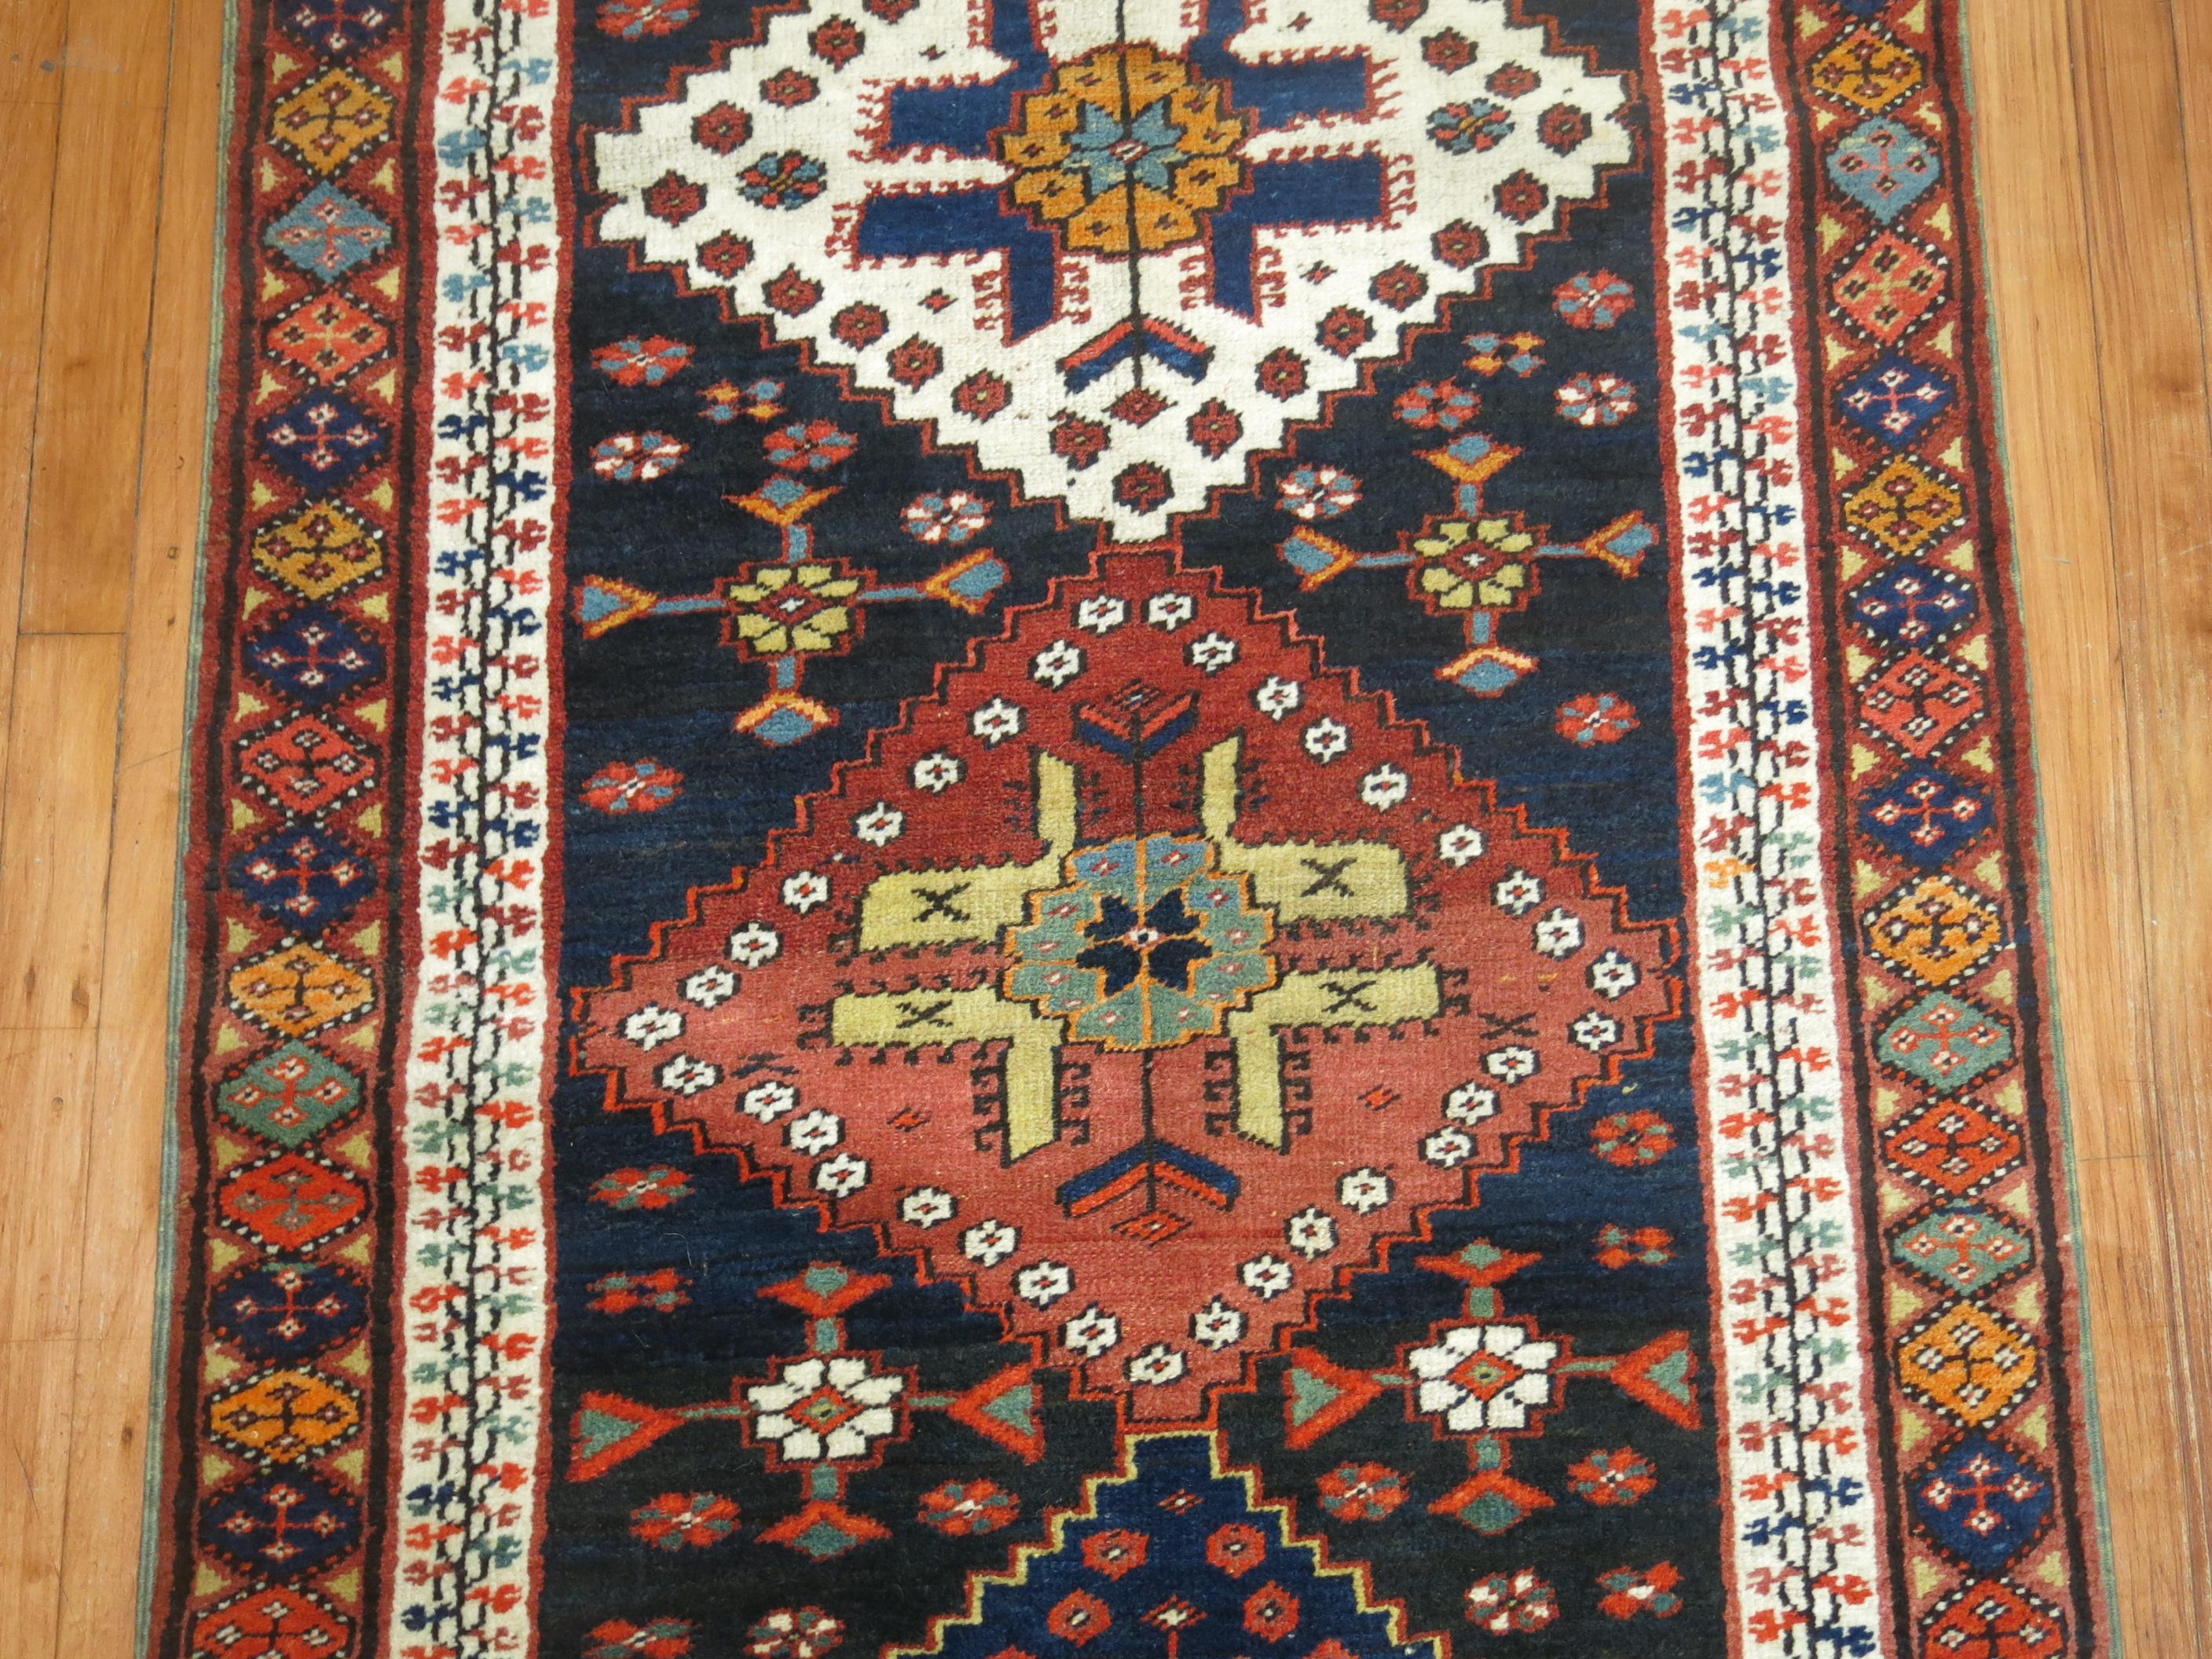 Early 20th century Persian Kurd runner with a bold geometric design on a navy ground

Measures: 3'1' x 15'8